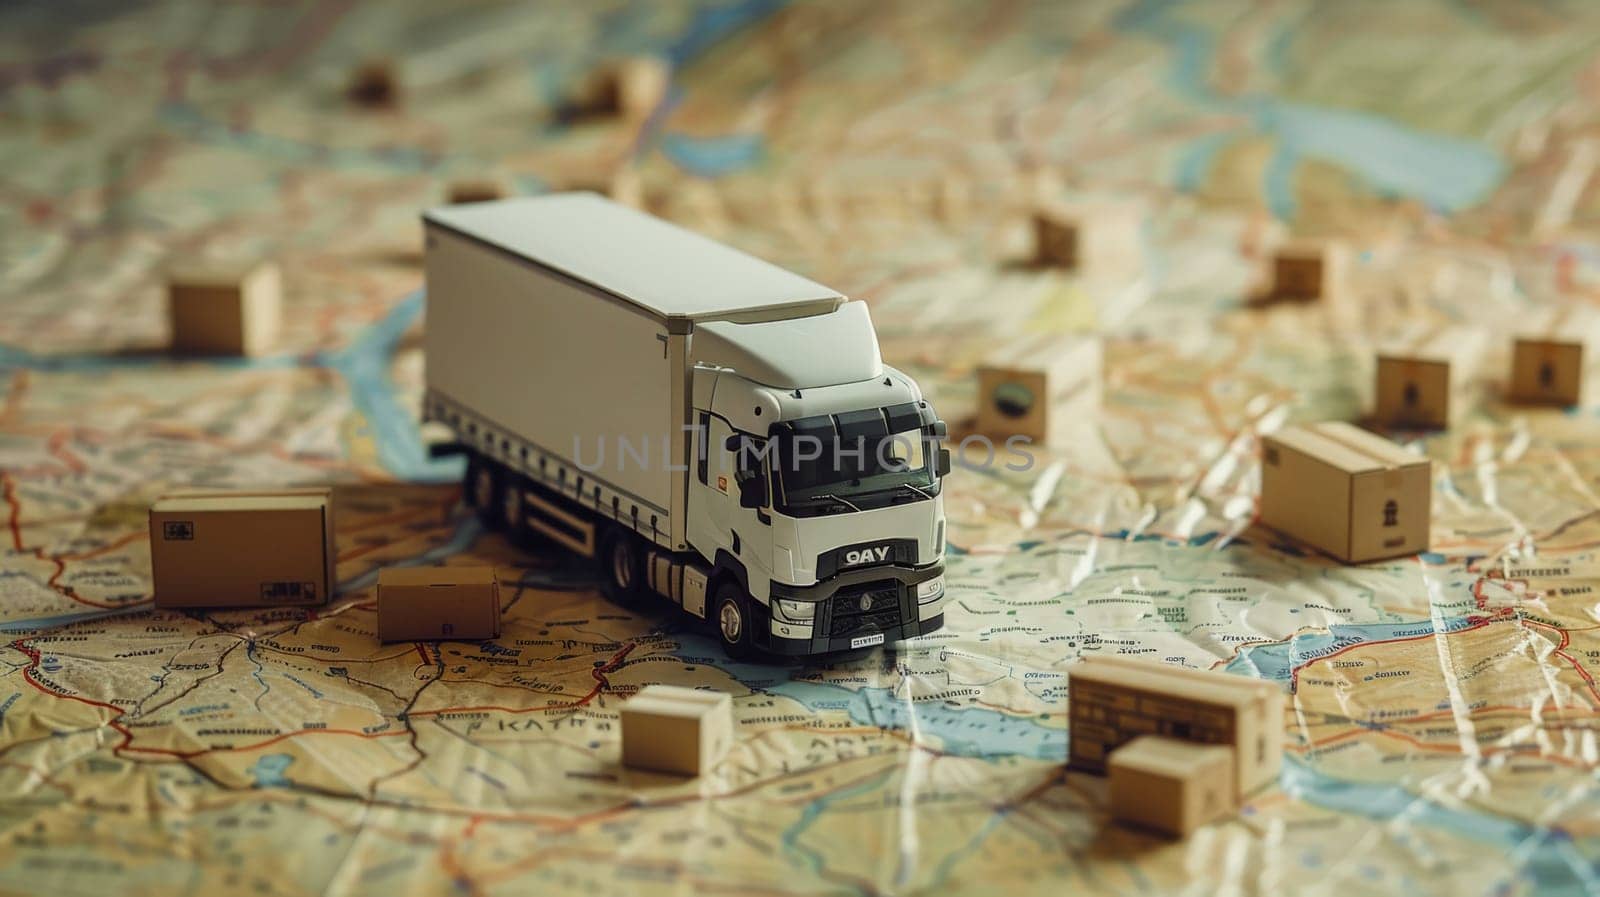 A paper map white white truck, Delivery truck or Transportation Truck, Transportation concept.